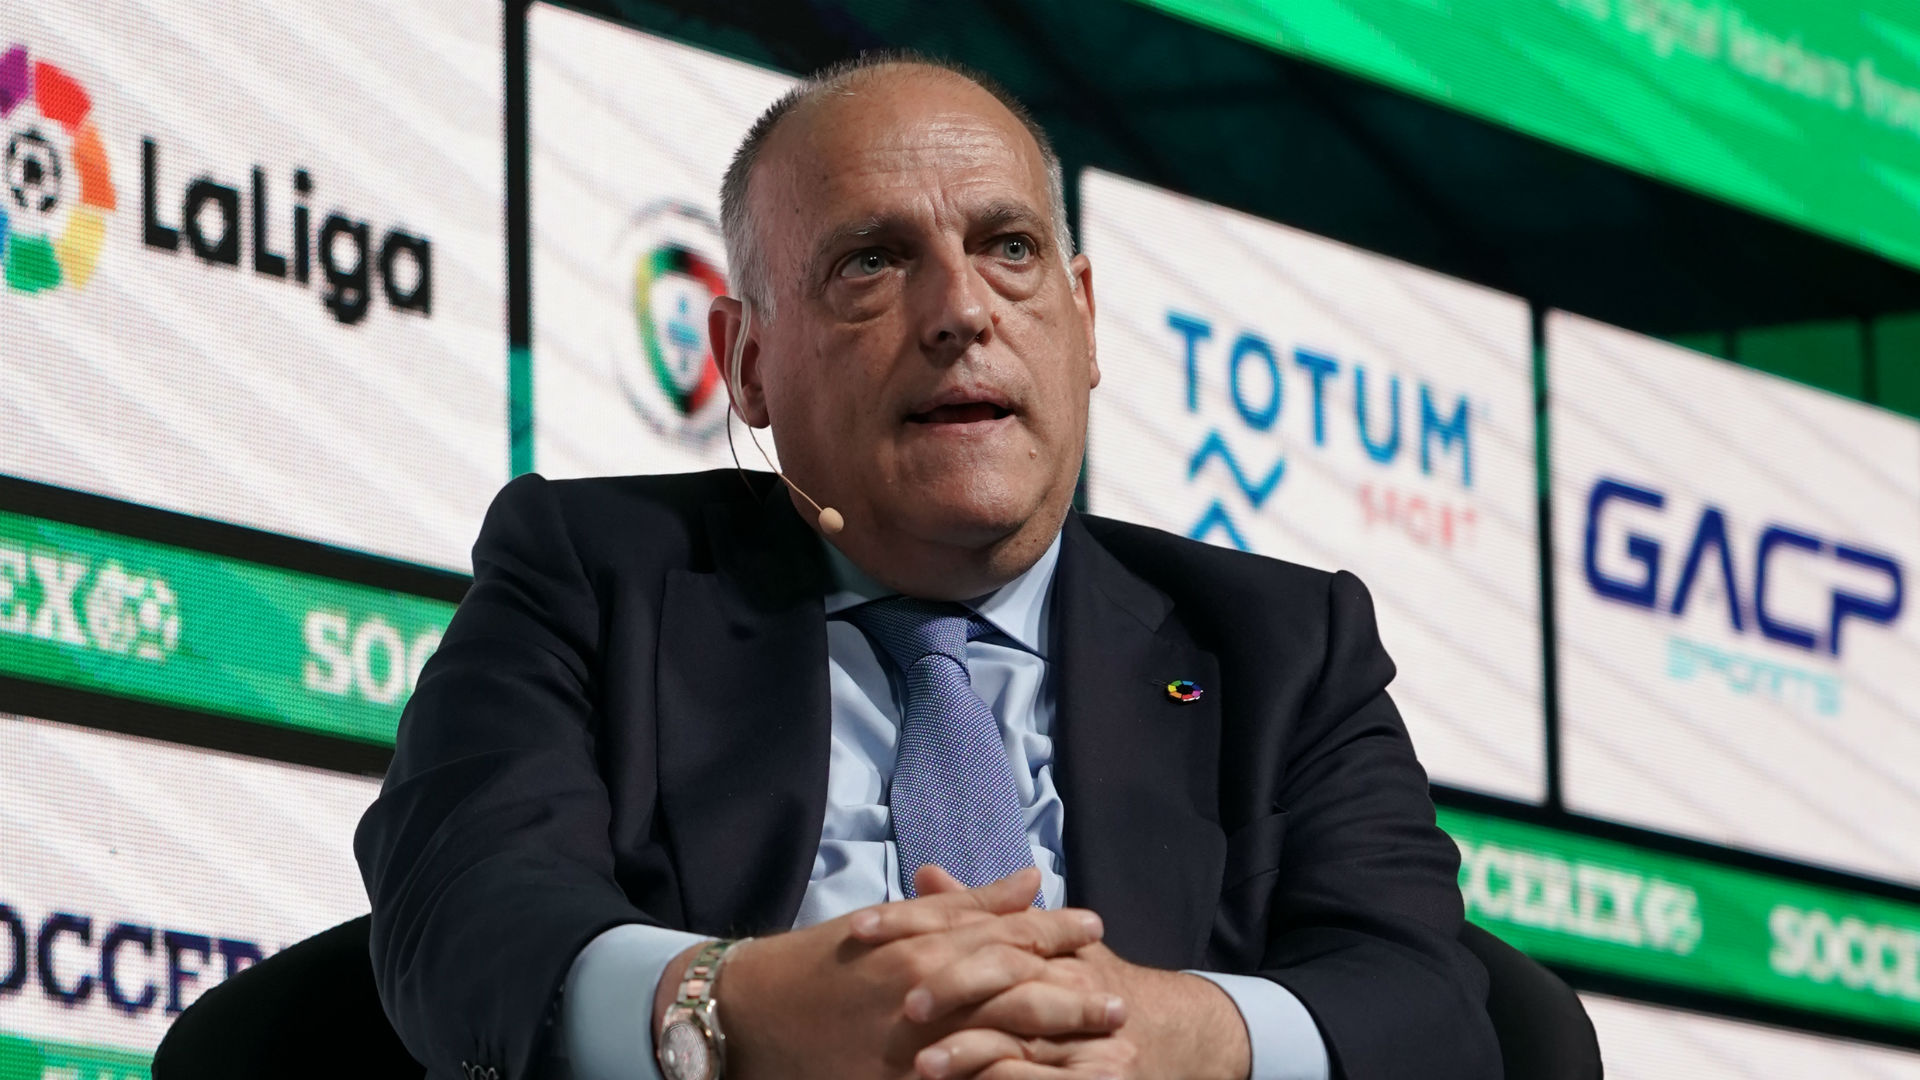 'There will be football every day' - Tebas set on June 12 date for La Liga resumption